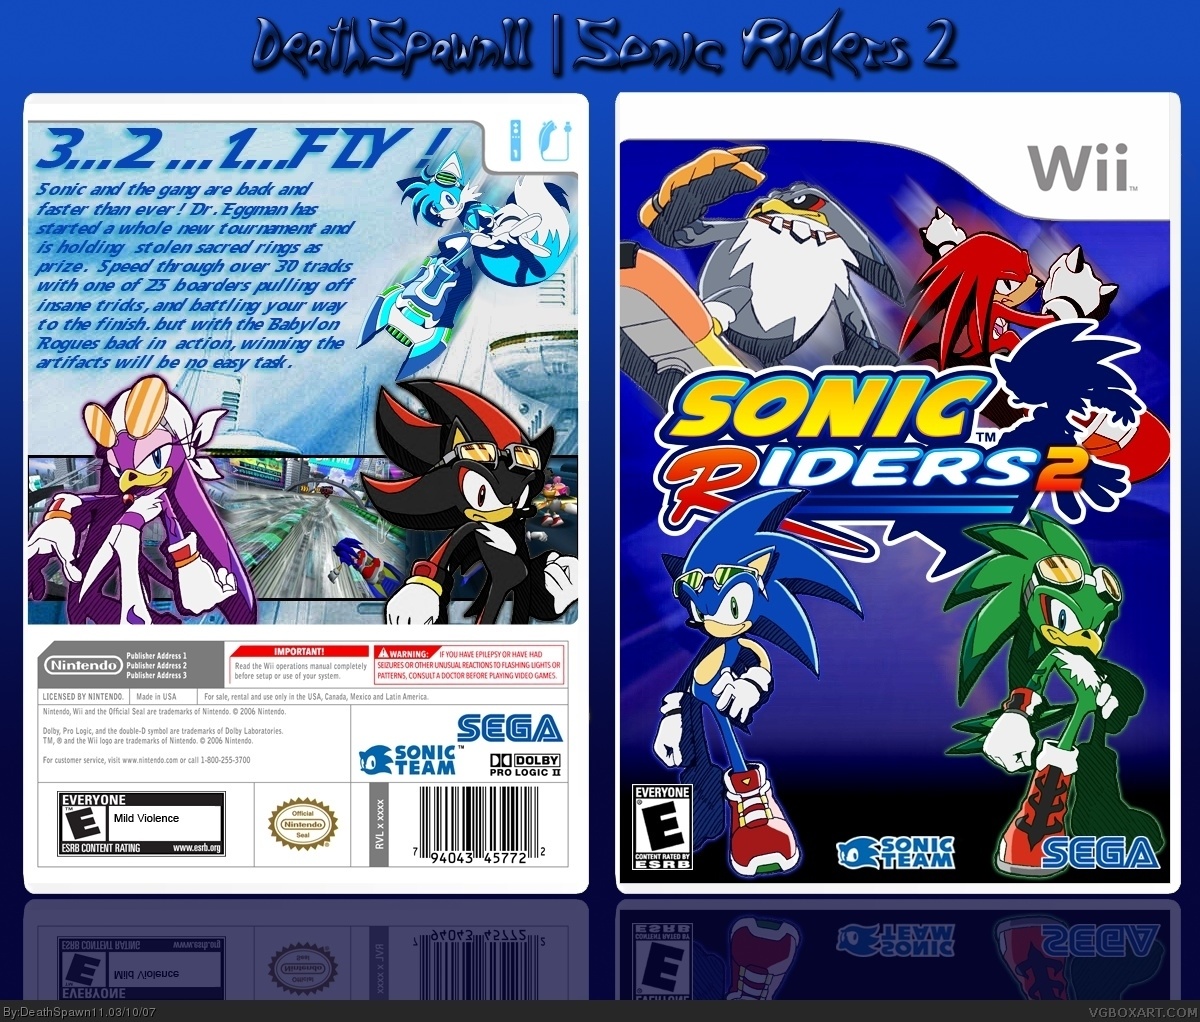 Viewing full size Sonic Riders 2 box cover.